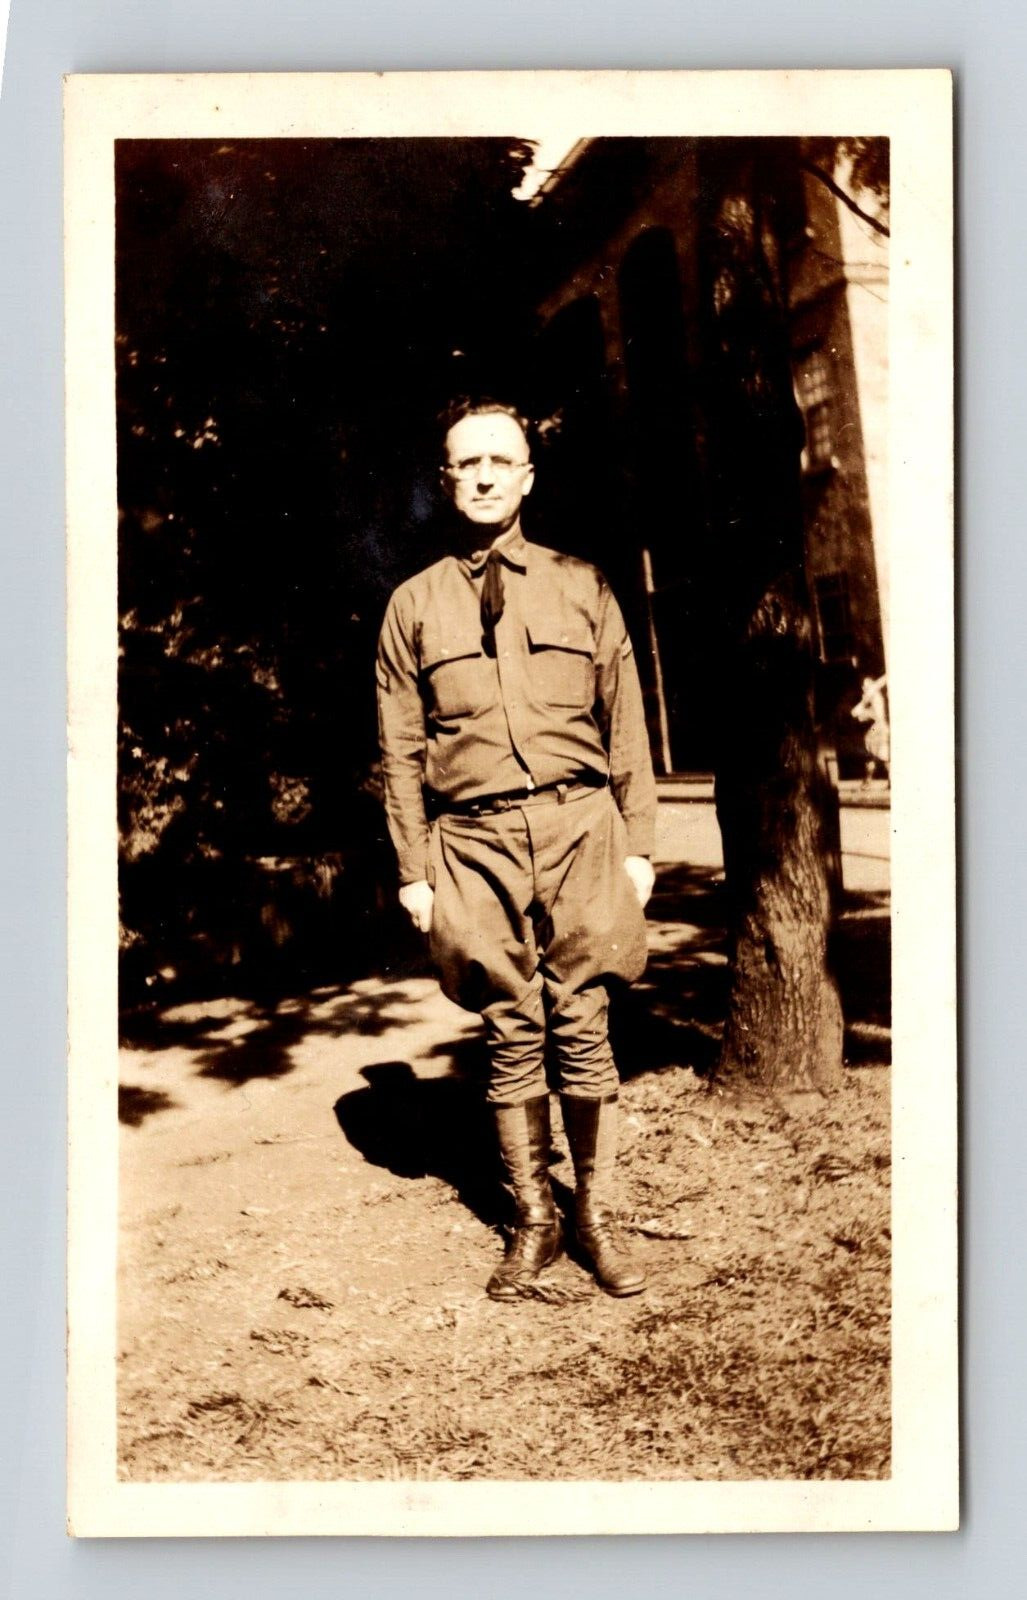 Vintage B/W 4.5x2.75 inch photograph man in US military uniform 1920's